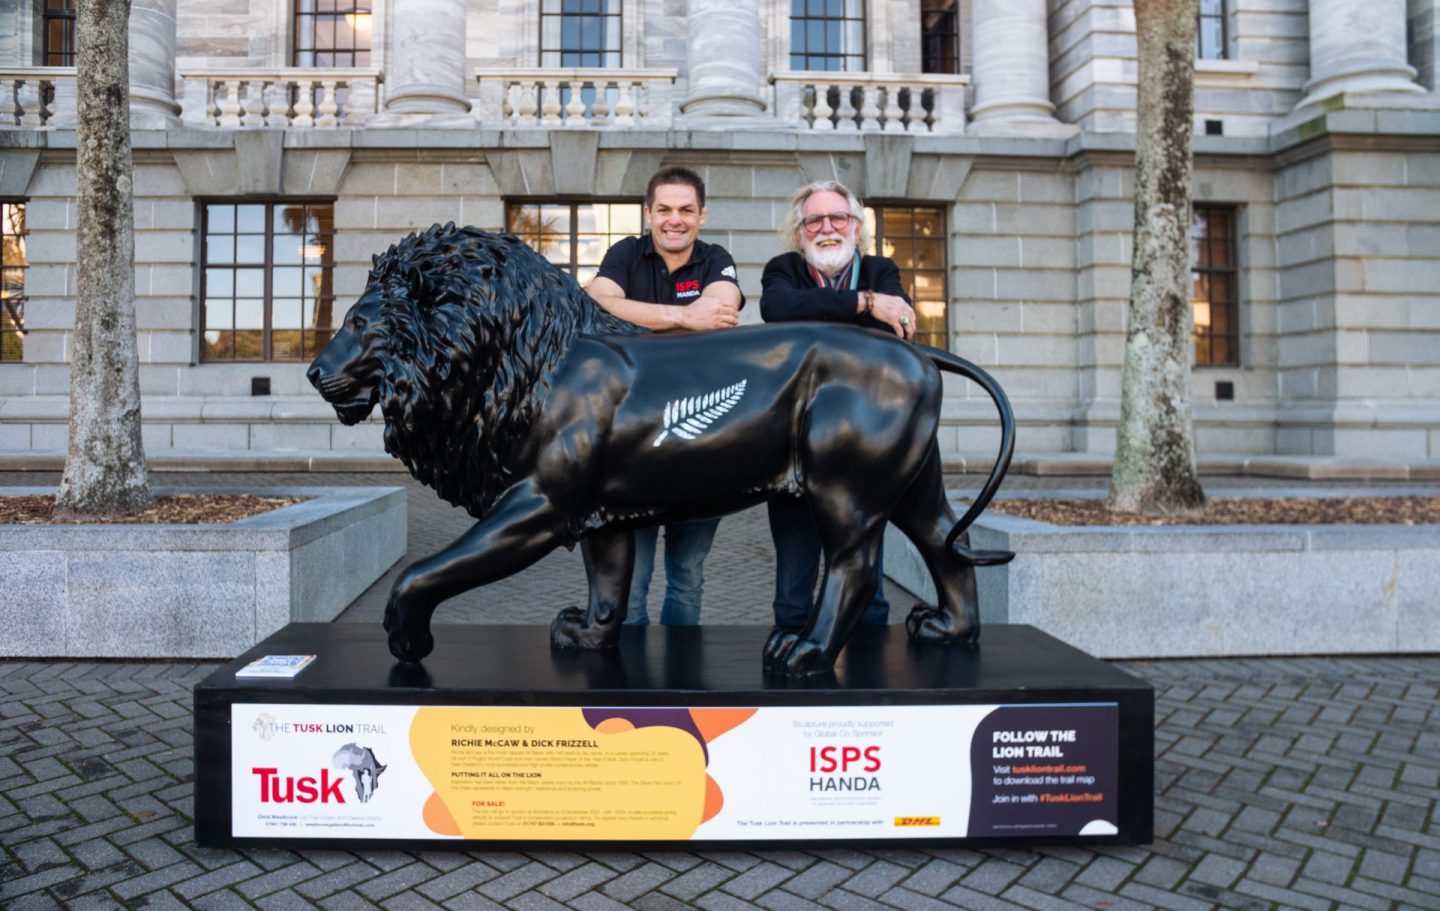 All Blacks legend Richie McCaw & Artist Dick Frizzell launch the Tusk Lion Trail in New Zealand 